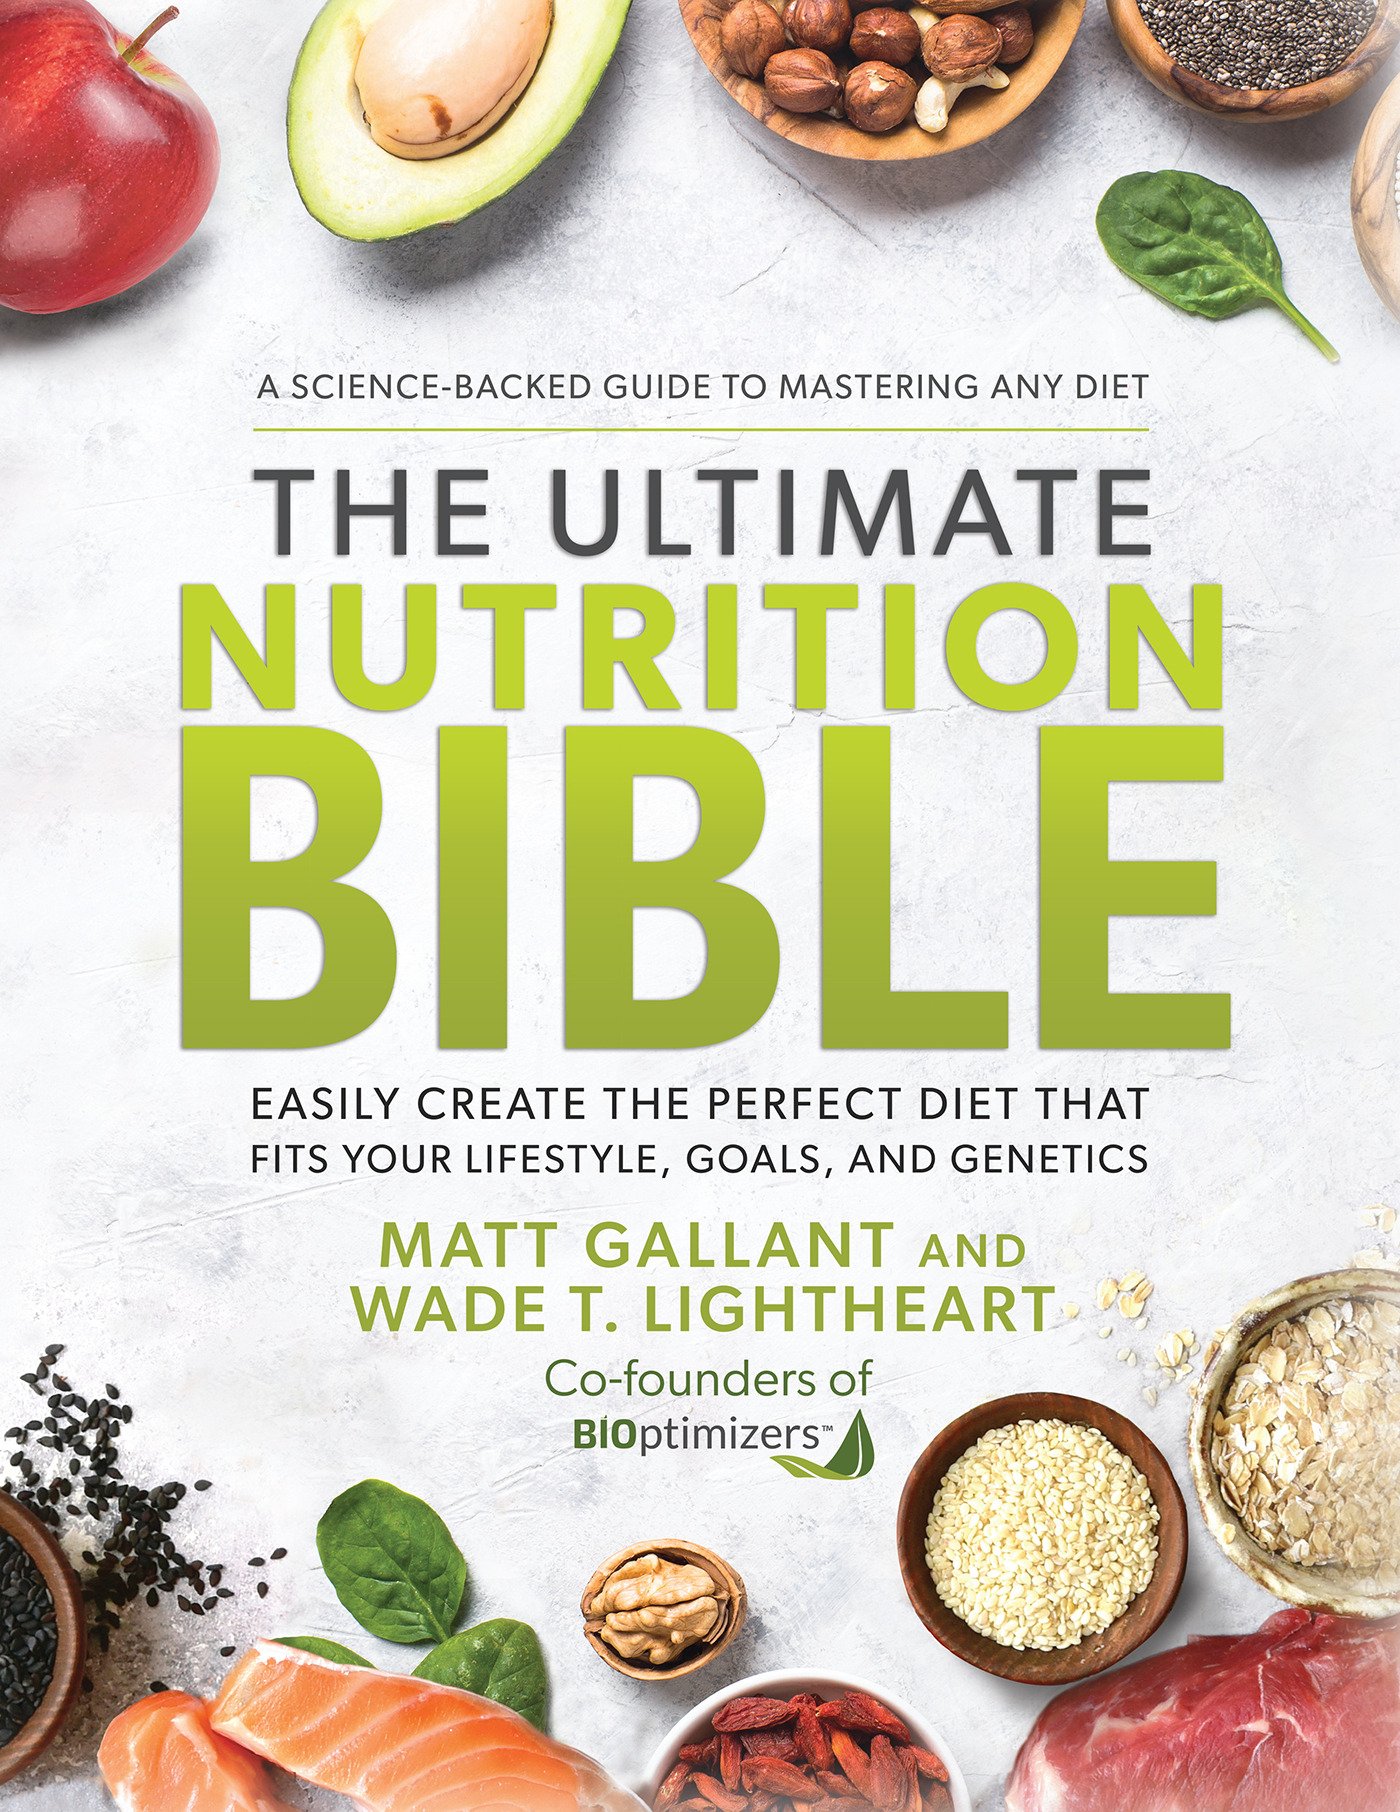 The Ultimate Nutrition Bible : Easily Create the Perfect Diet that Fits Your Lifestyle, Goals, and Genetics | GALLANT, MATT (Auteur) | Lightheart, Wade T. (Auteur)